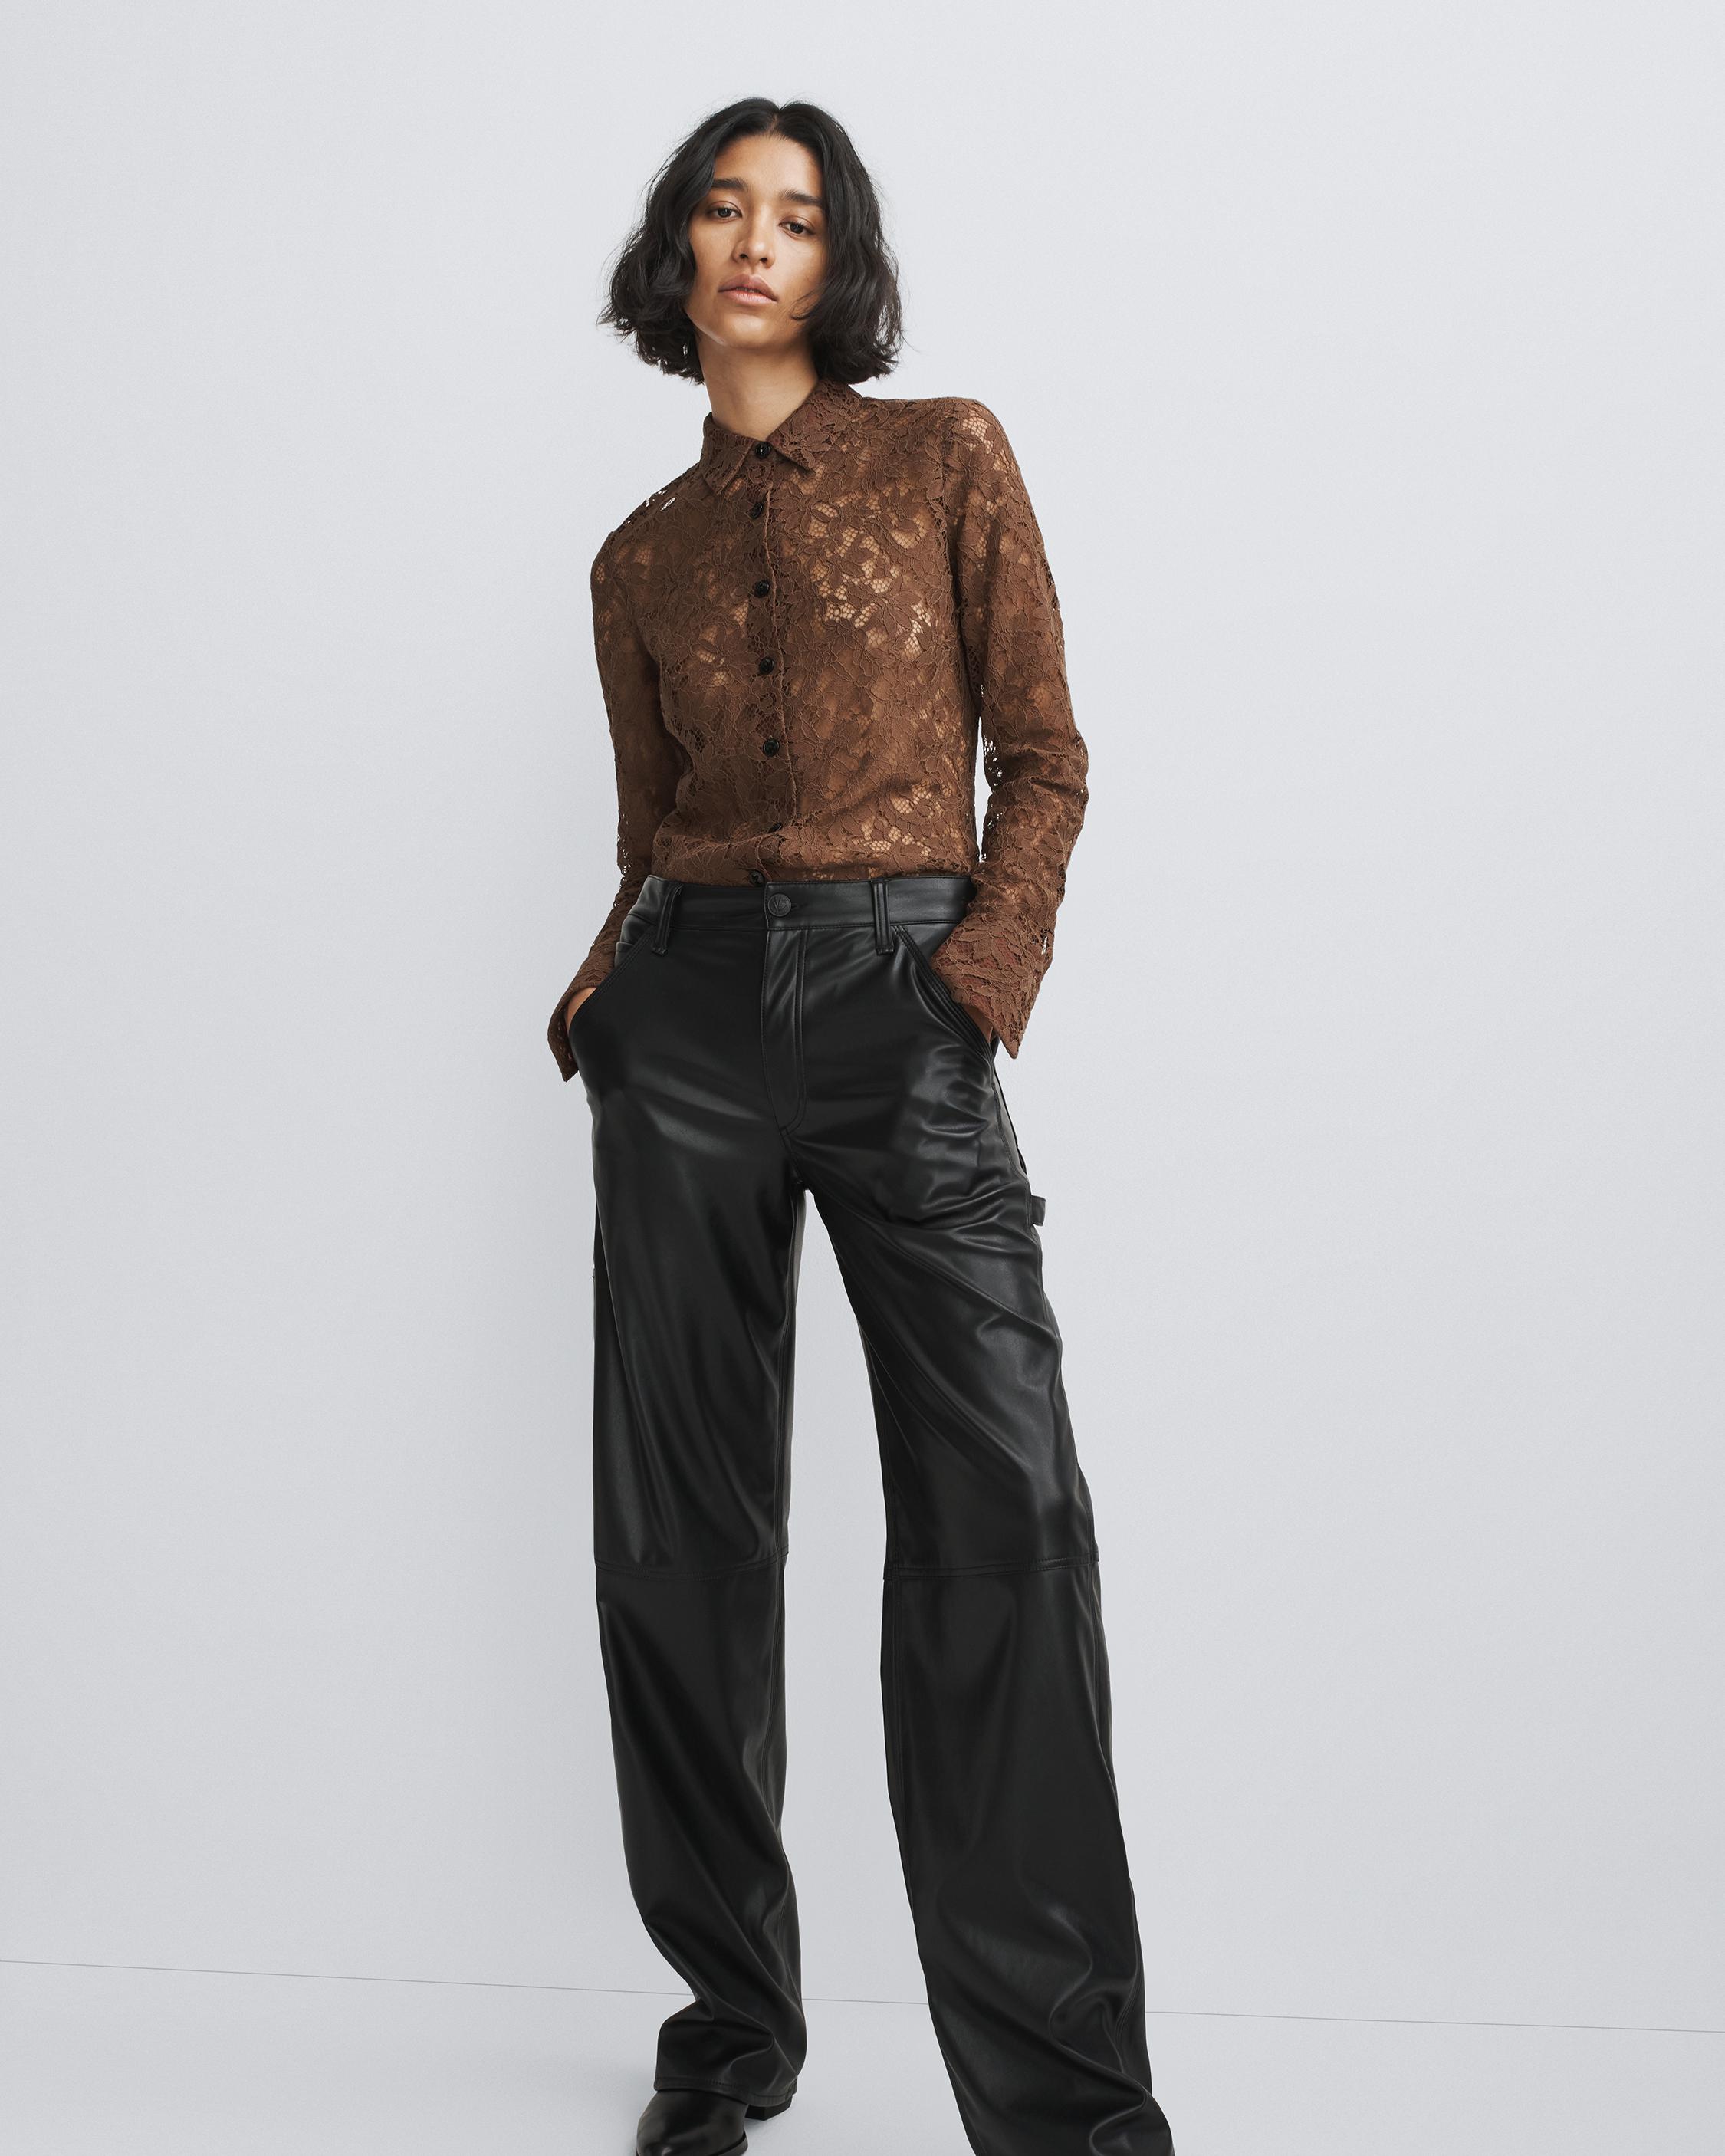 ZARA Brown Faux Leather high rise Lace Pants Size XS NEW 